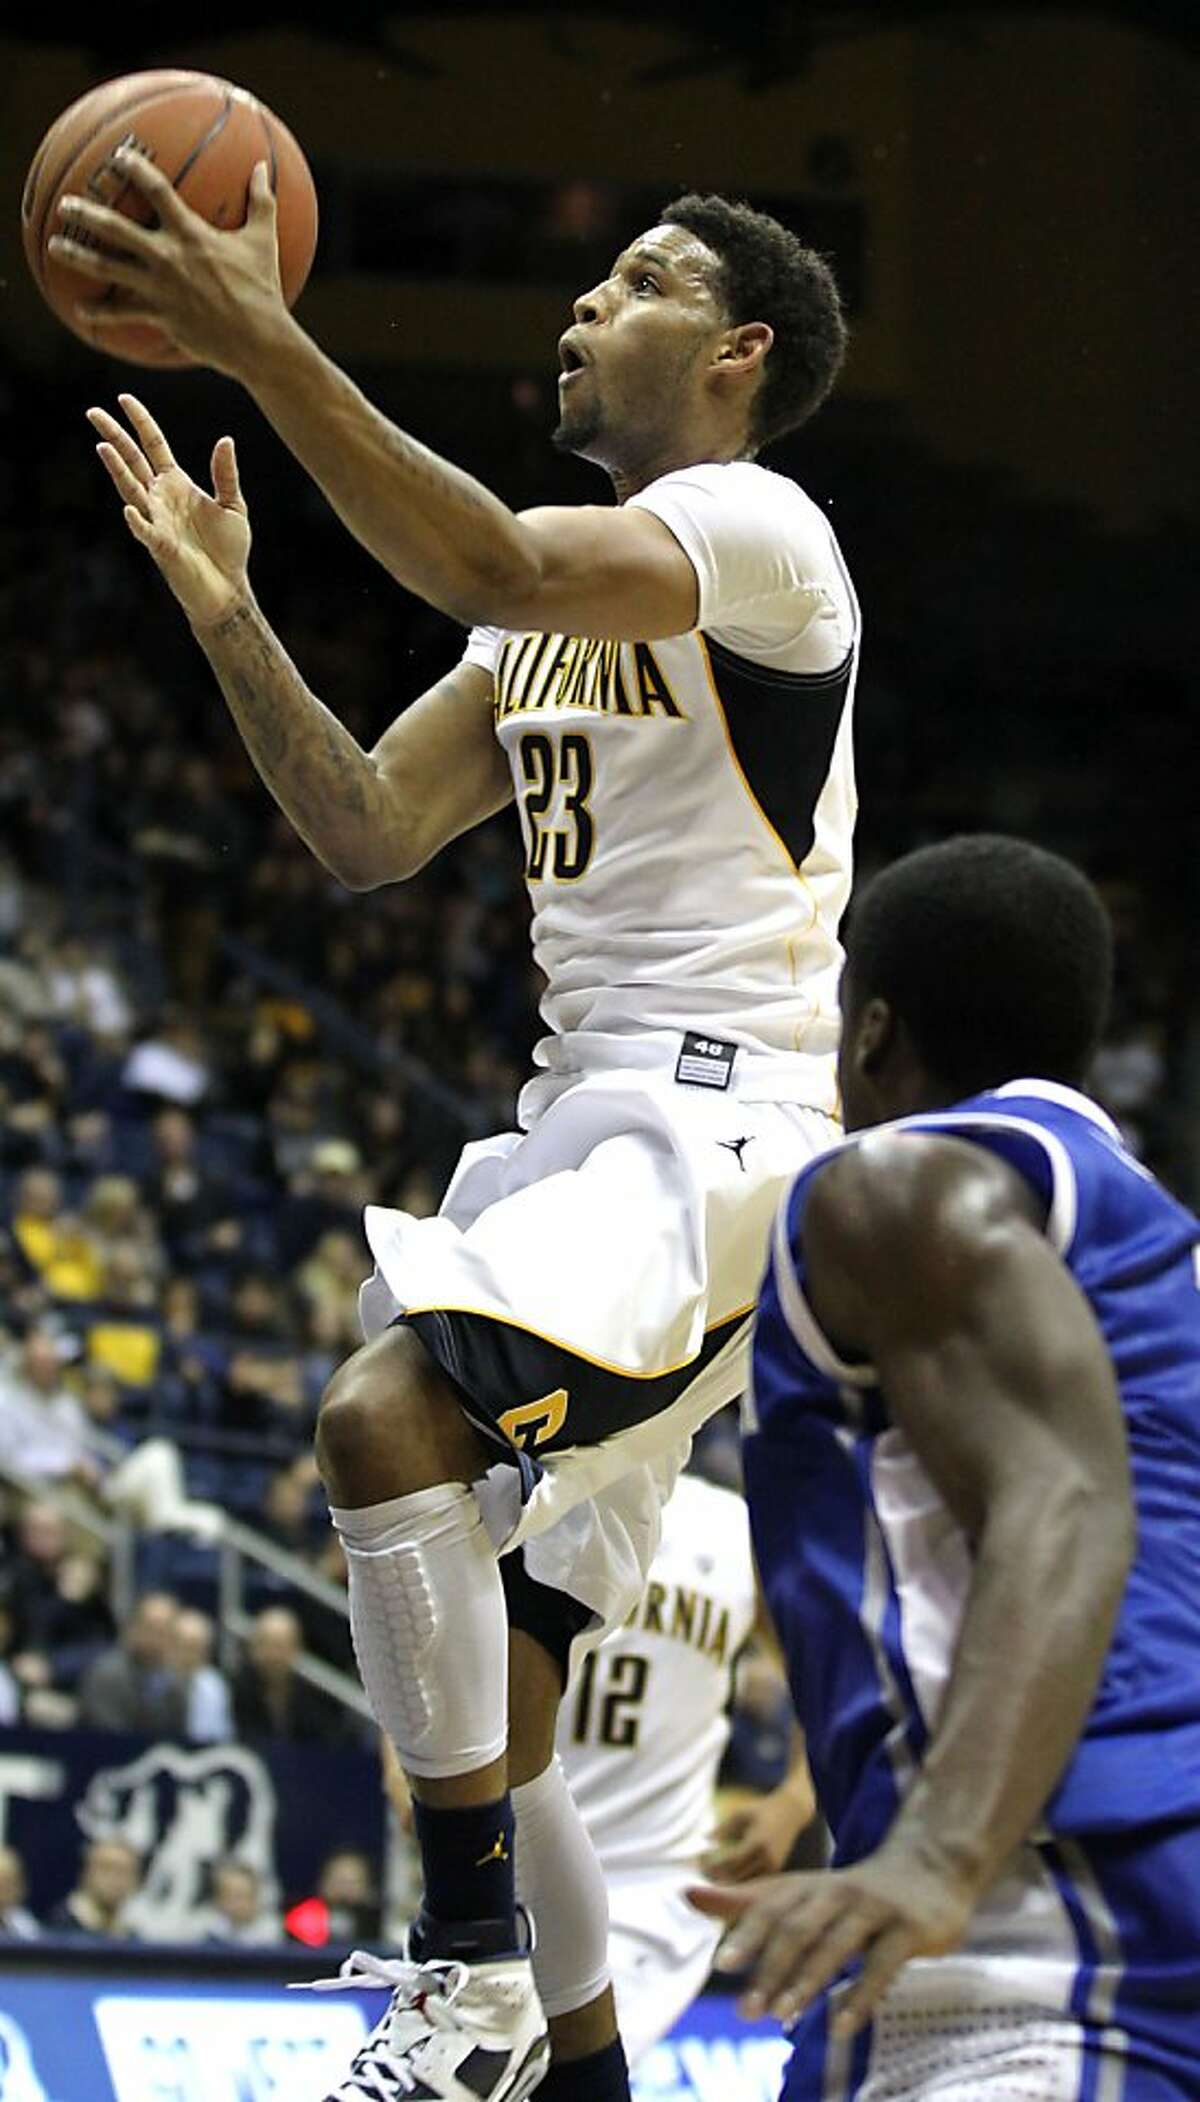 California's Allen Crabbe (23) drives to the basket against Creighton during the first half of an NCAA college basketball game in Berkeley, Calif., Saturday, Dec. 15, 2012.